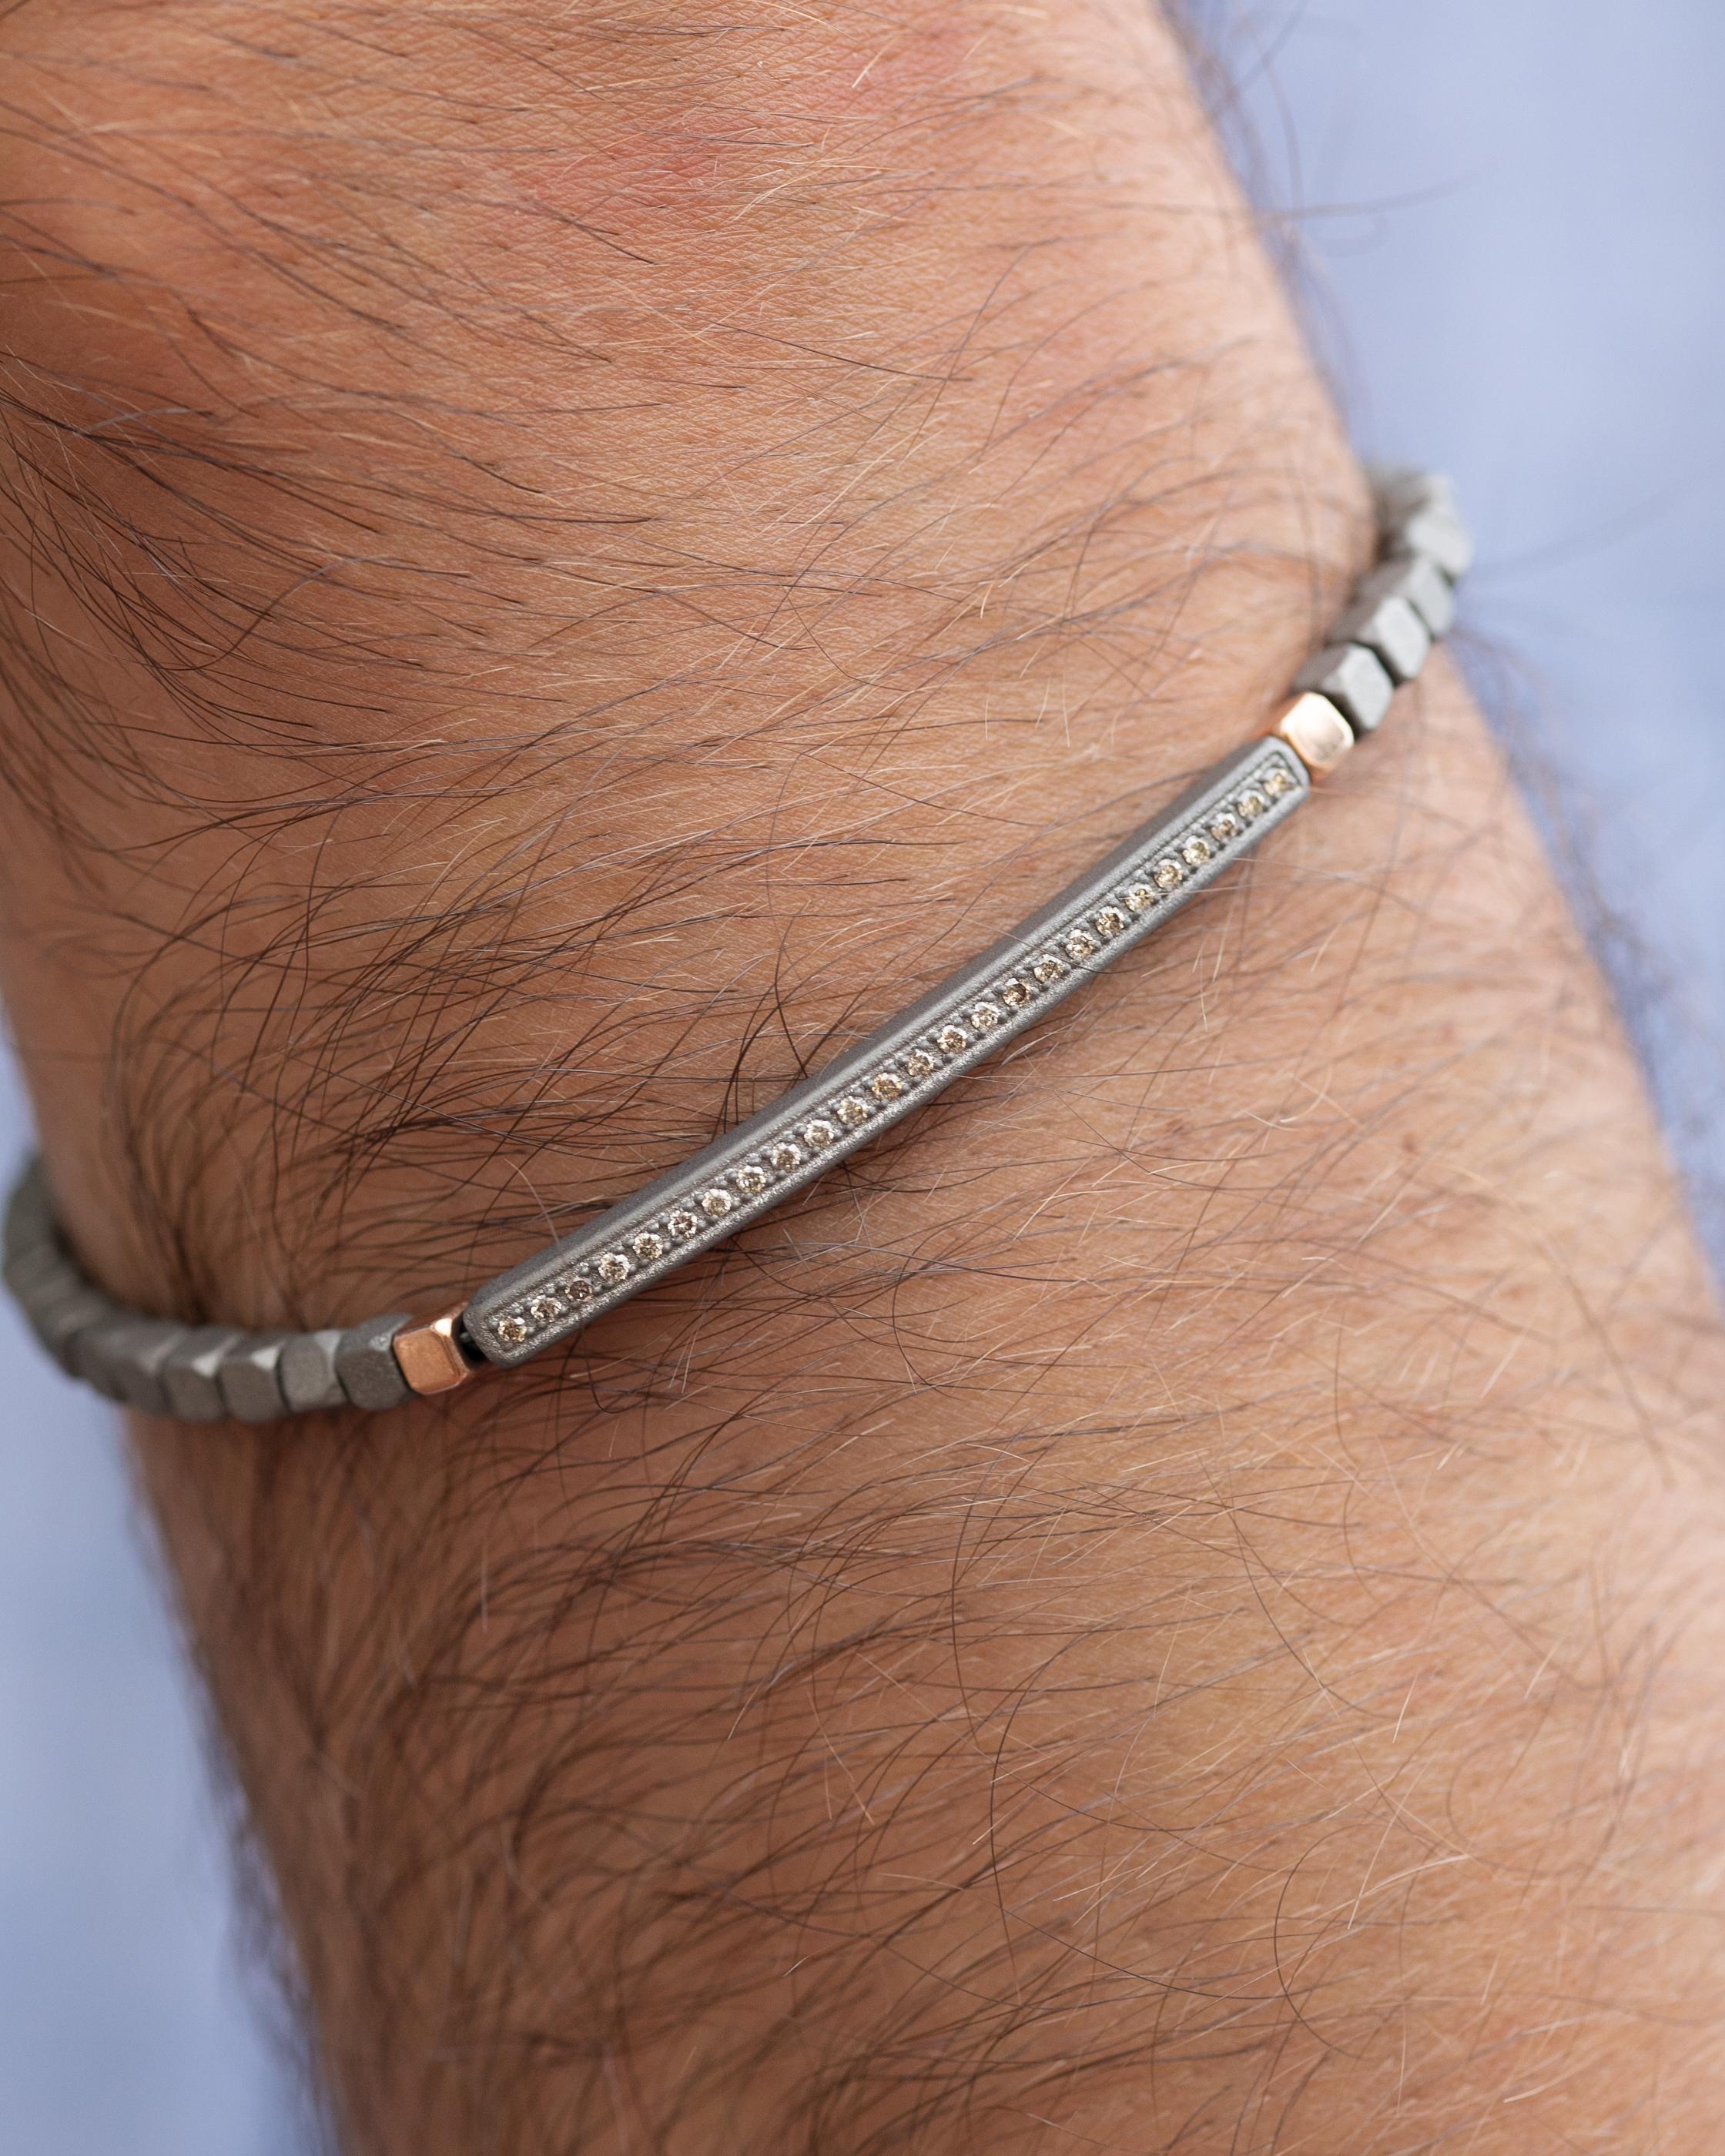 This titanium bracelet is from our Men's collection. Bracelet is decorated by 25 beautiful natural brown diamonds in total of 0.20 Carat and 18K rose gold details. The bracelet is 20 cm long. Perfect for daily wear!

The men’s collection is a